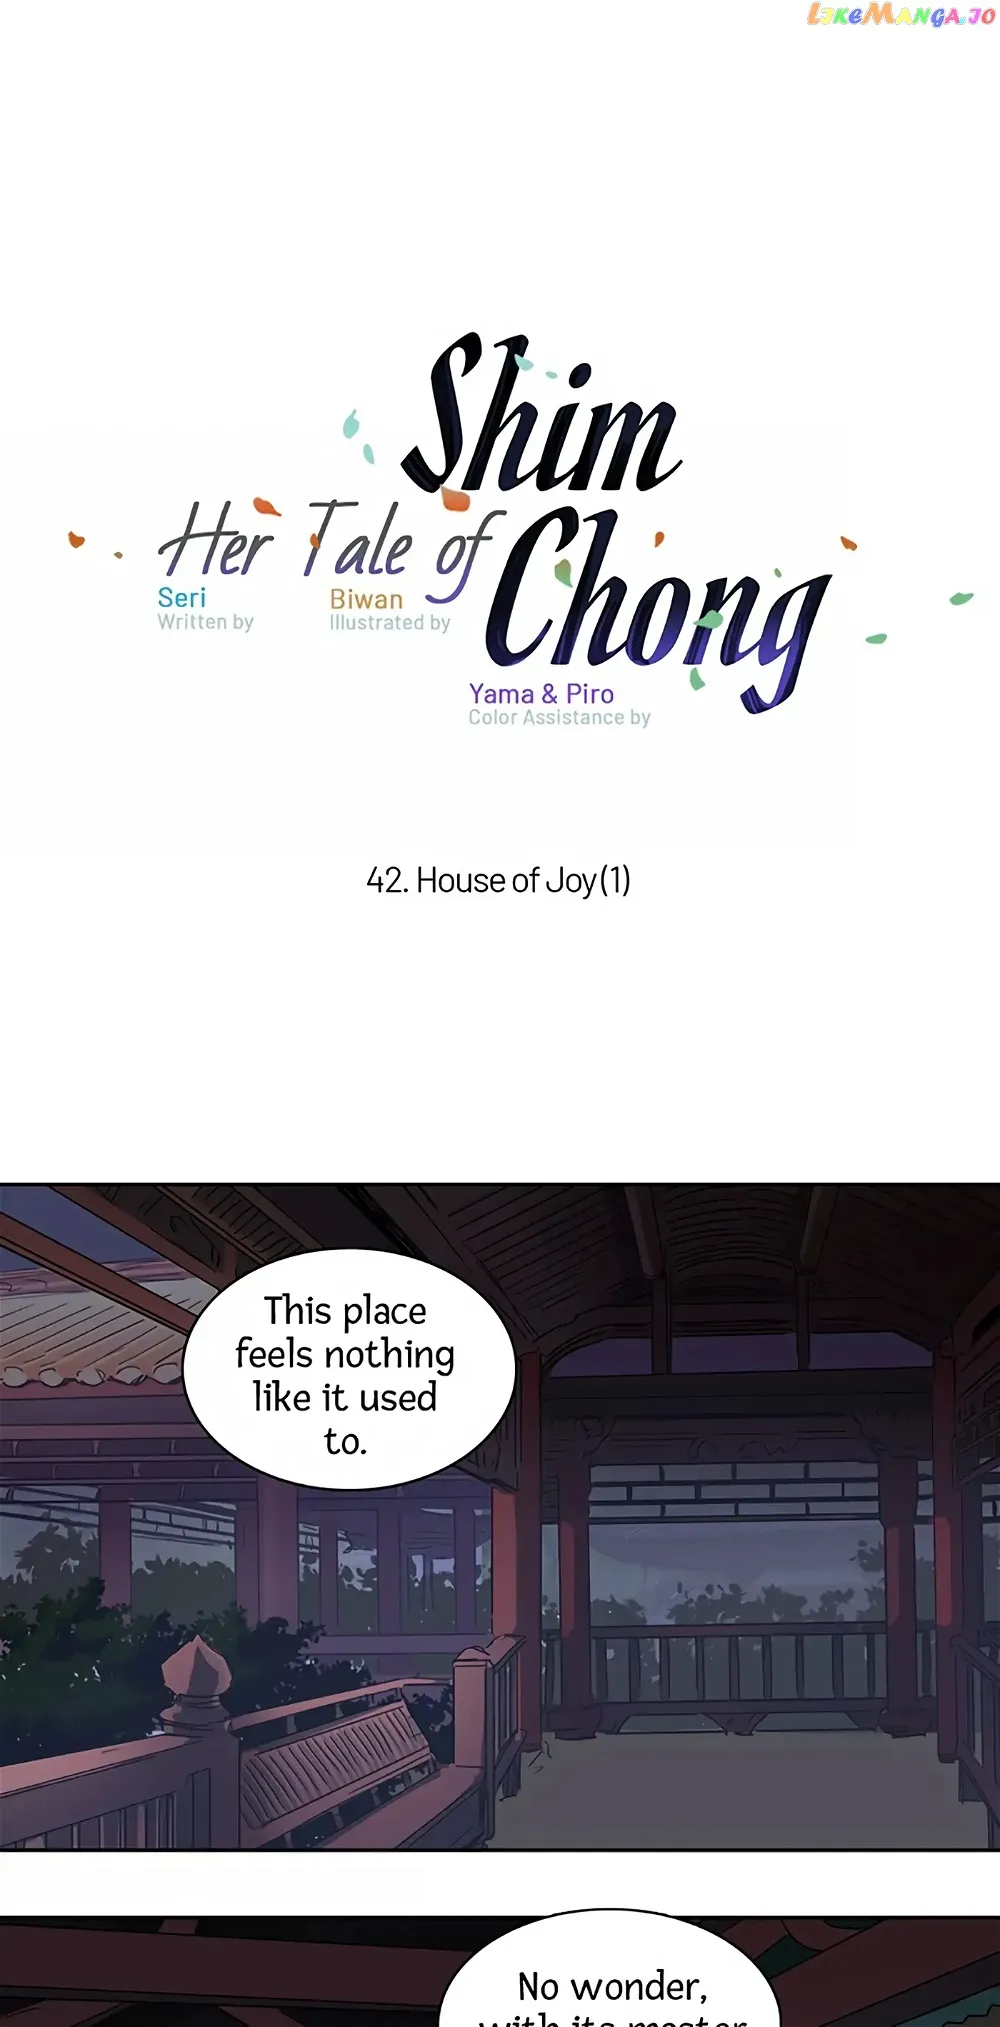 Her Tale of Shim Chong Chapter 42 - Page 1